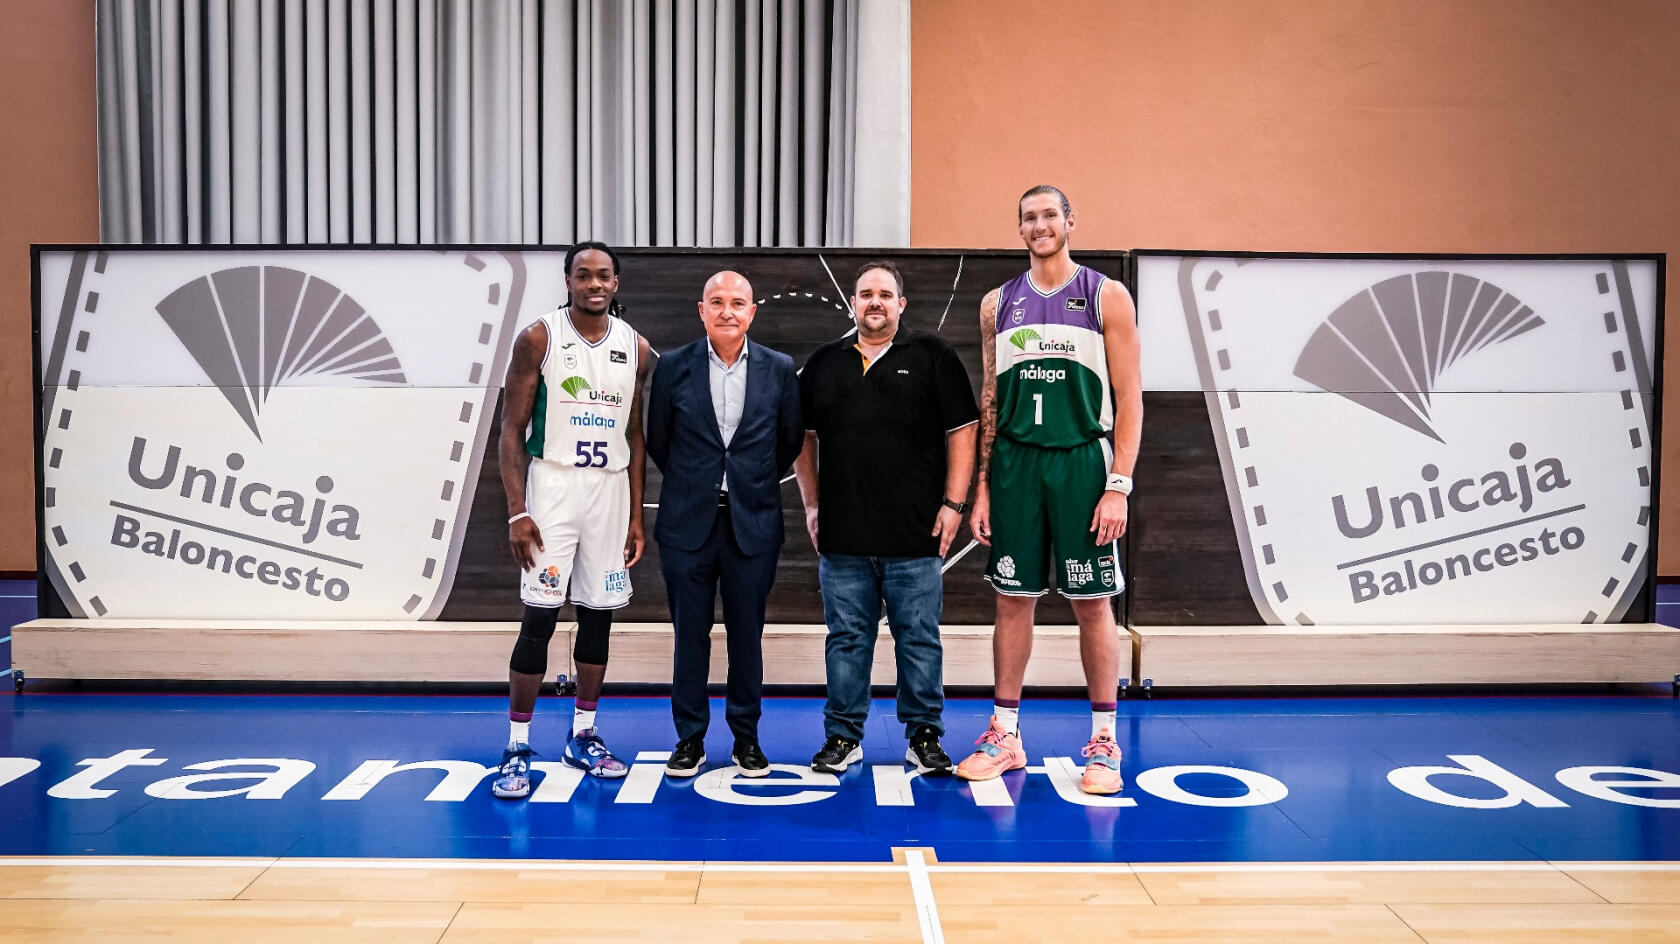 Cathedral Software and Unicaja Baloncesto team up